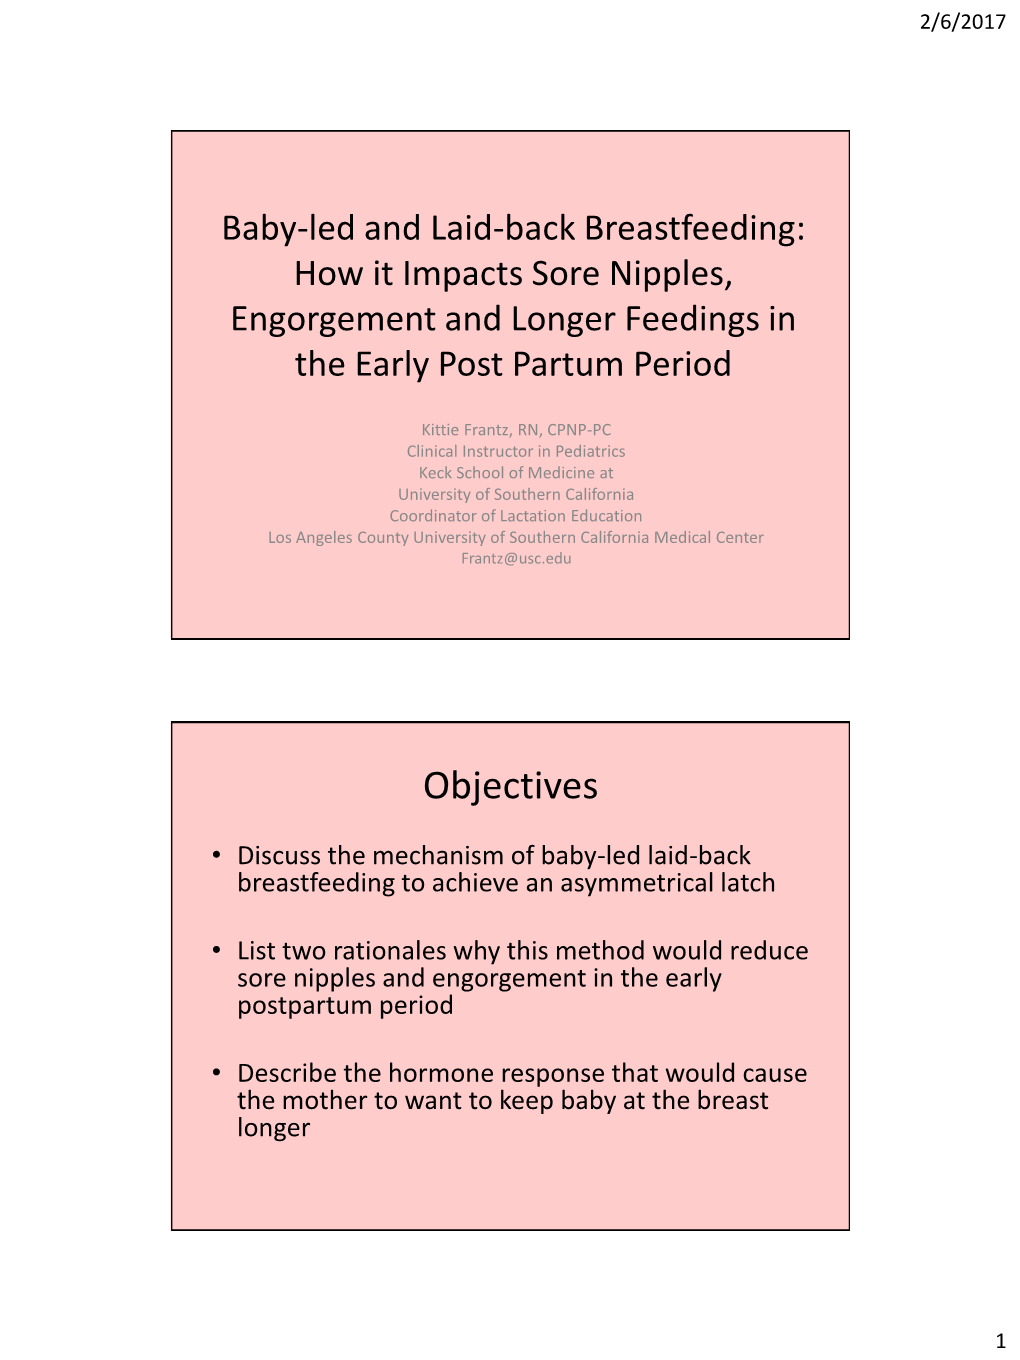 Baby-Led and Laid-Back Breastfeeding: How It Impacts Sore Nipples, Engorgement and Longer Feedings in the Early Post Partum Period